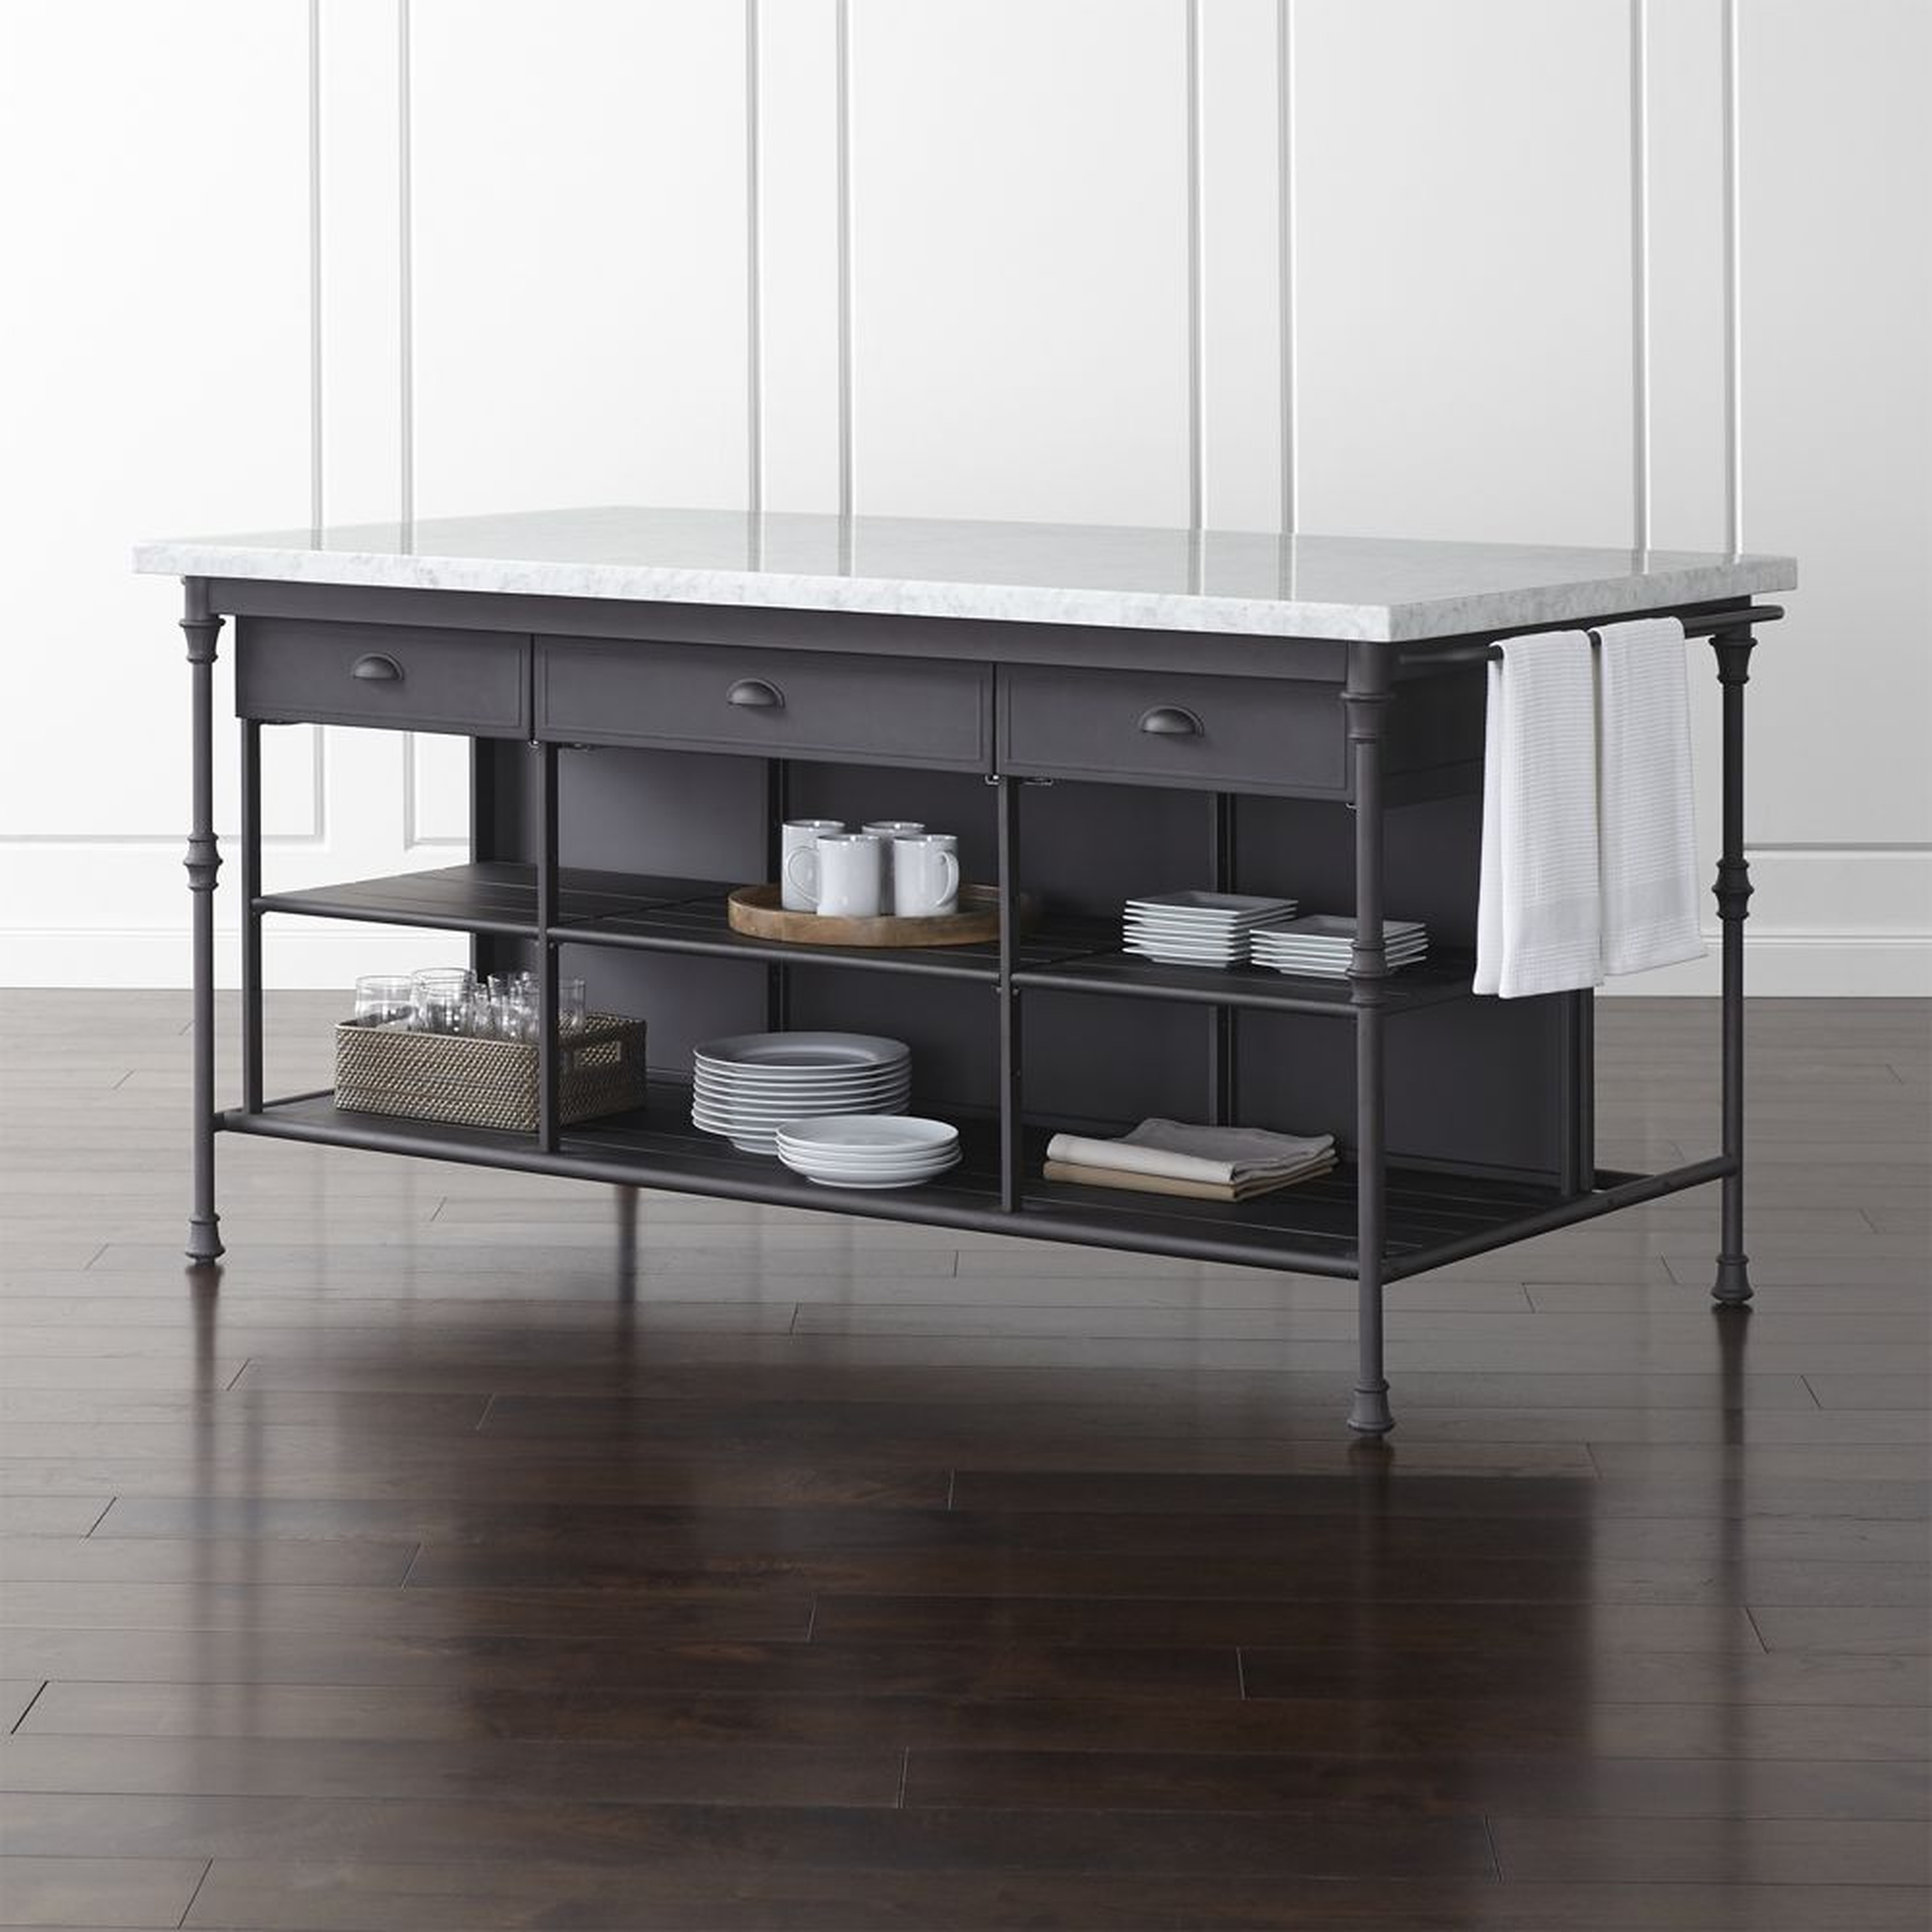 French 72" Large Kitchen Island - Crate and Barrel